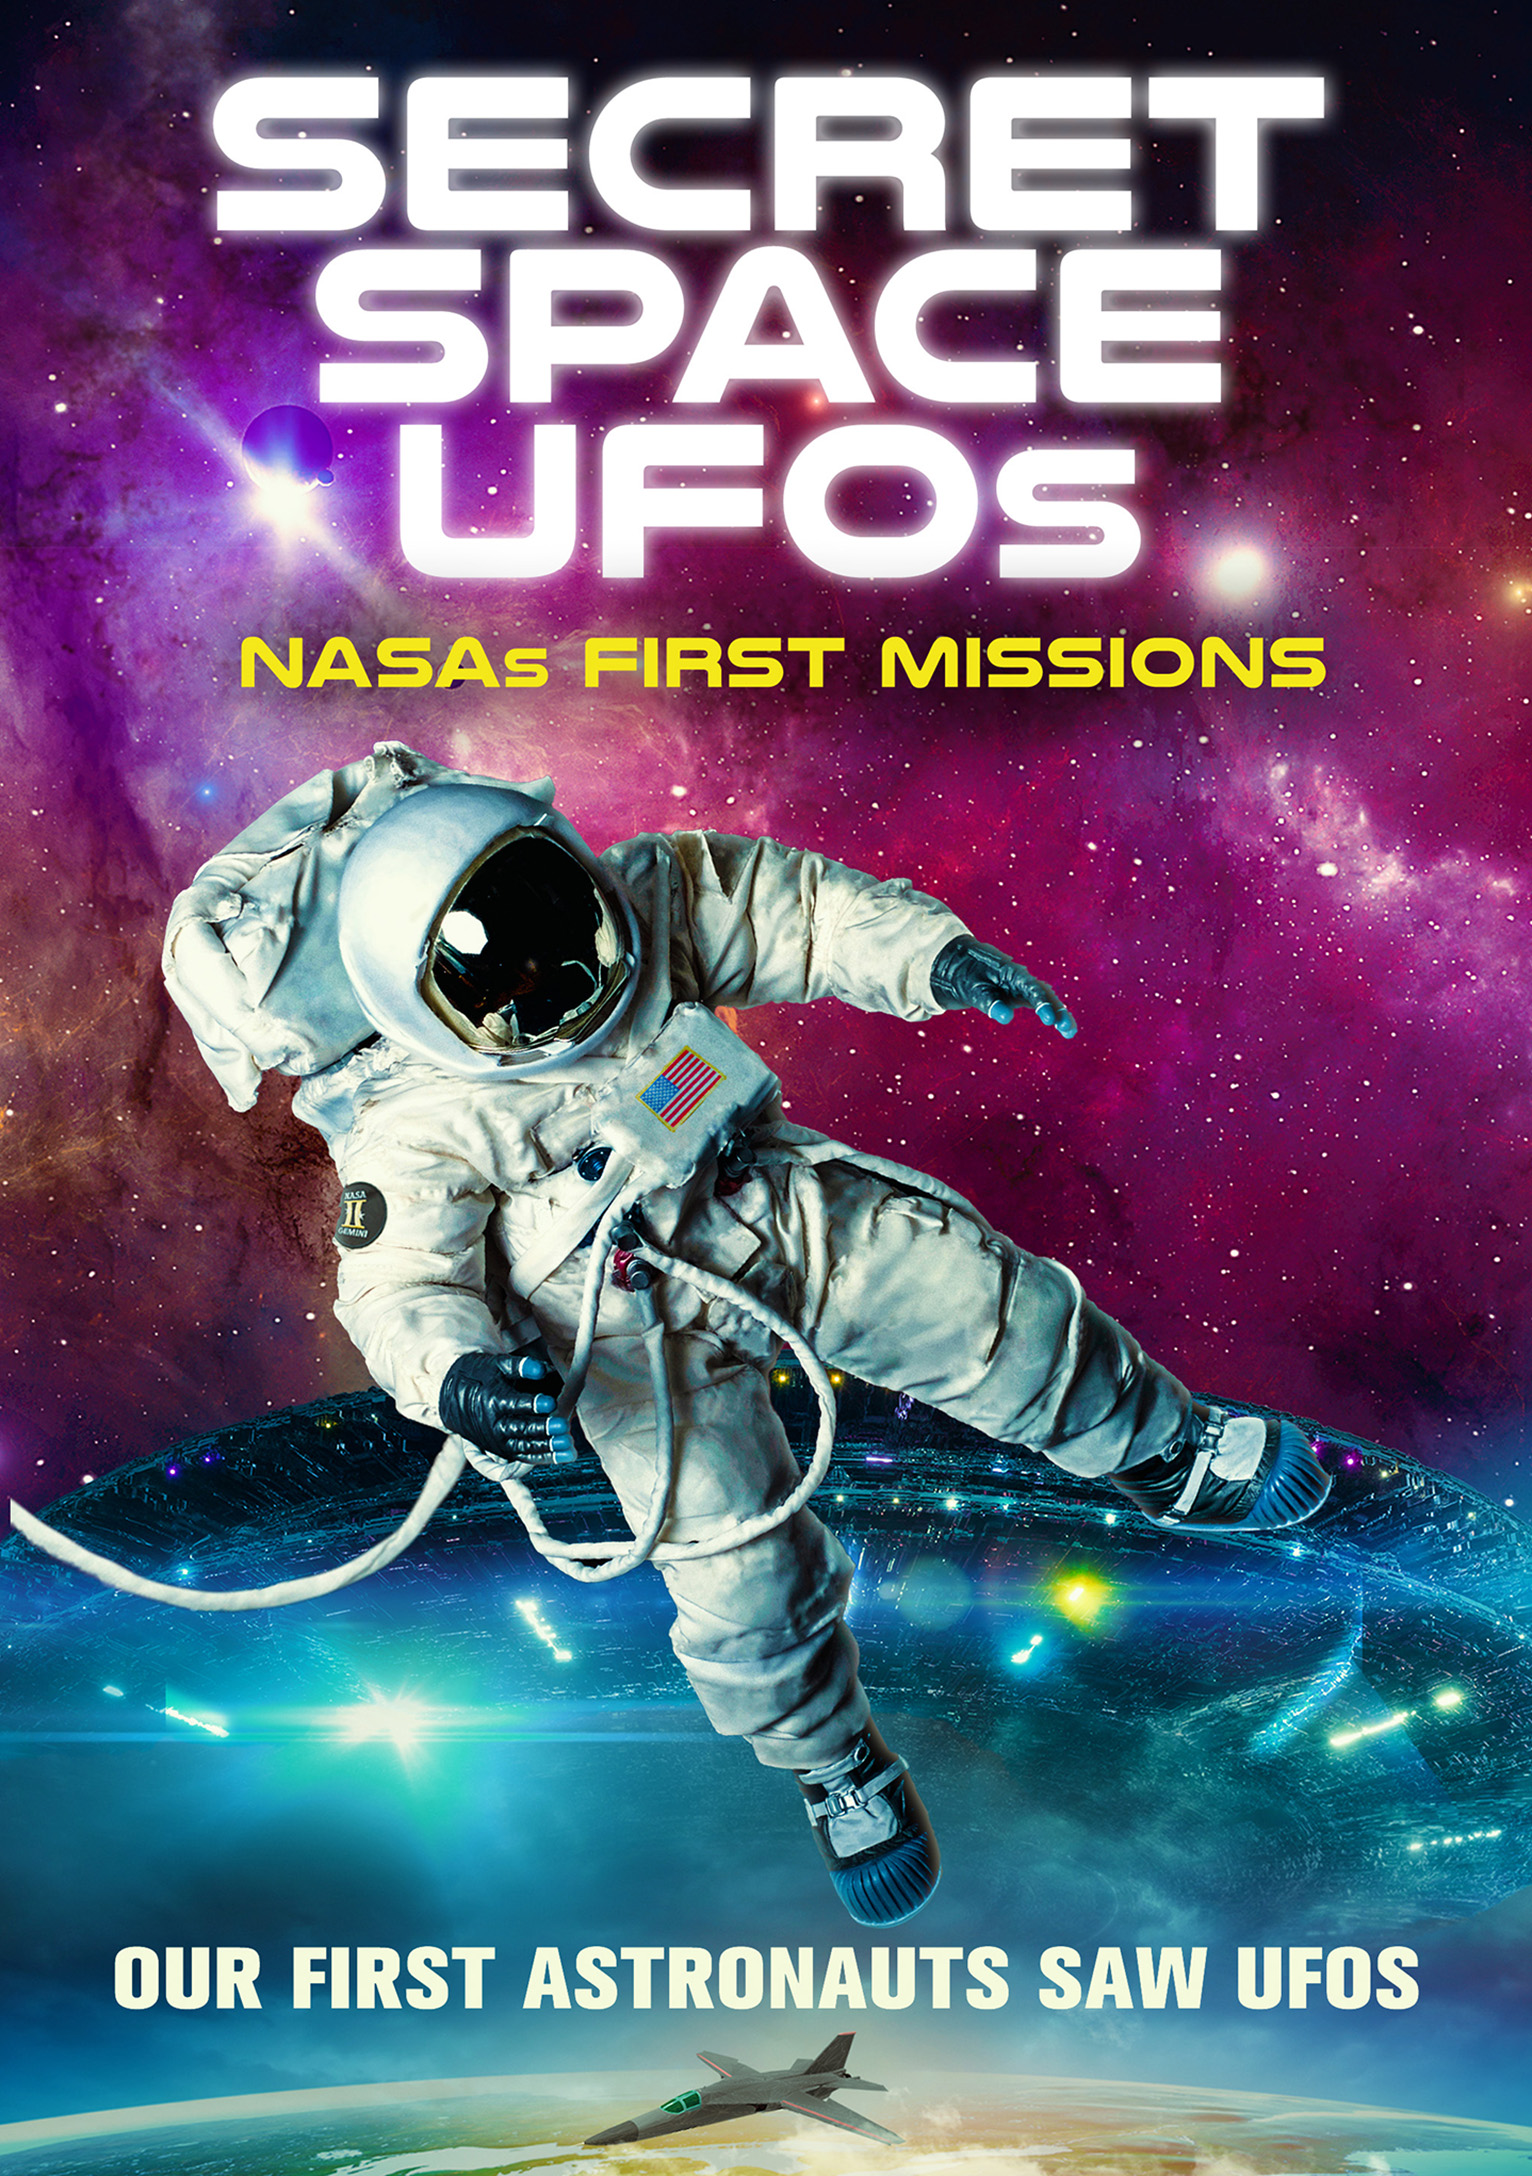 Secret Space UFOs: NASA's First Missions - Key Art